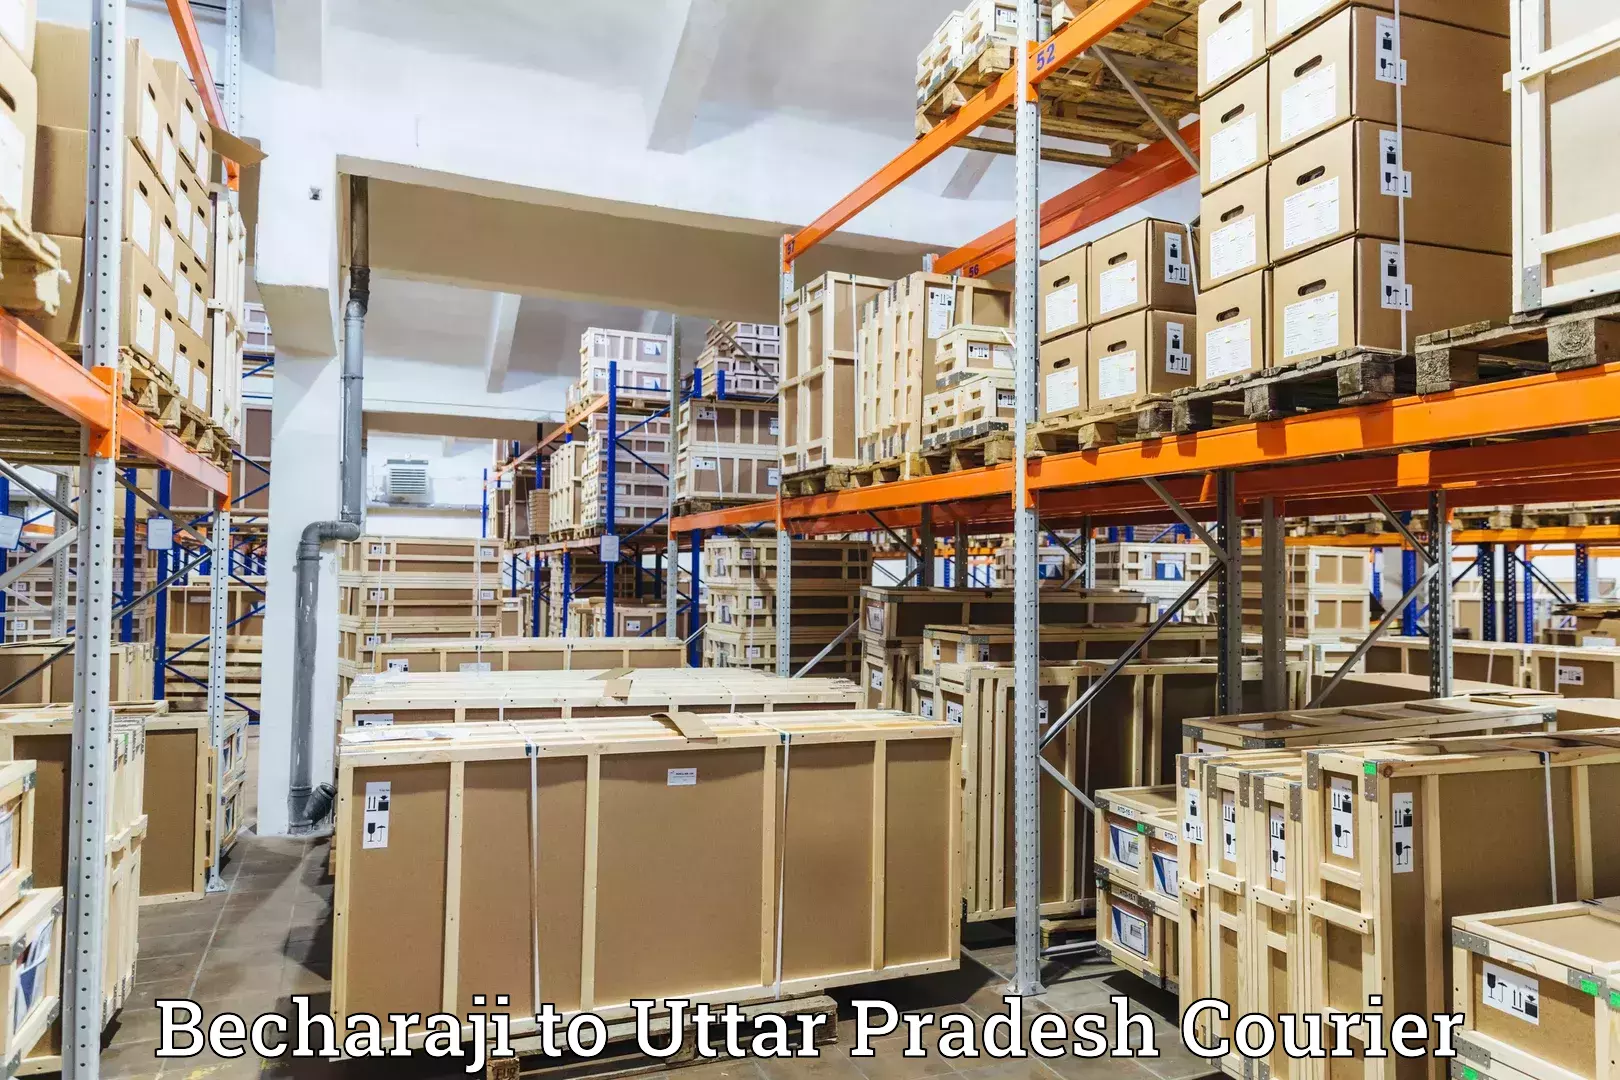 State-of-the-art courier technology Becharaji to Akbarpur